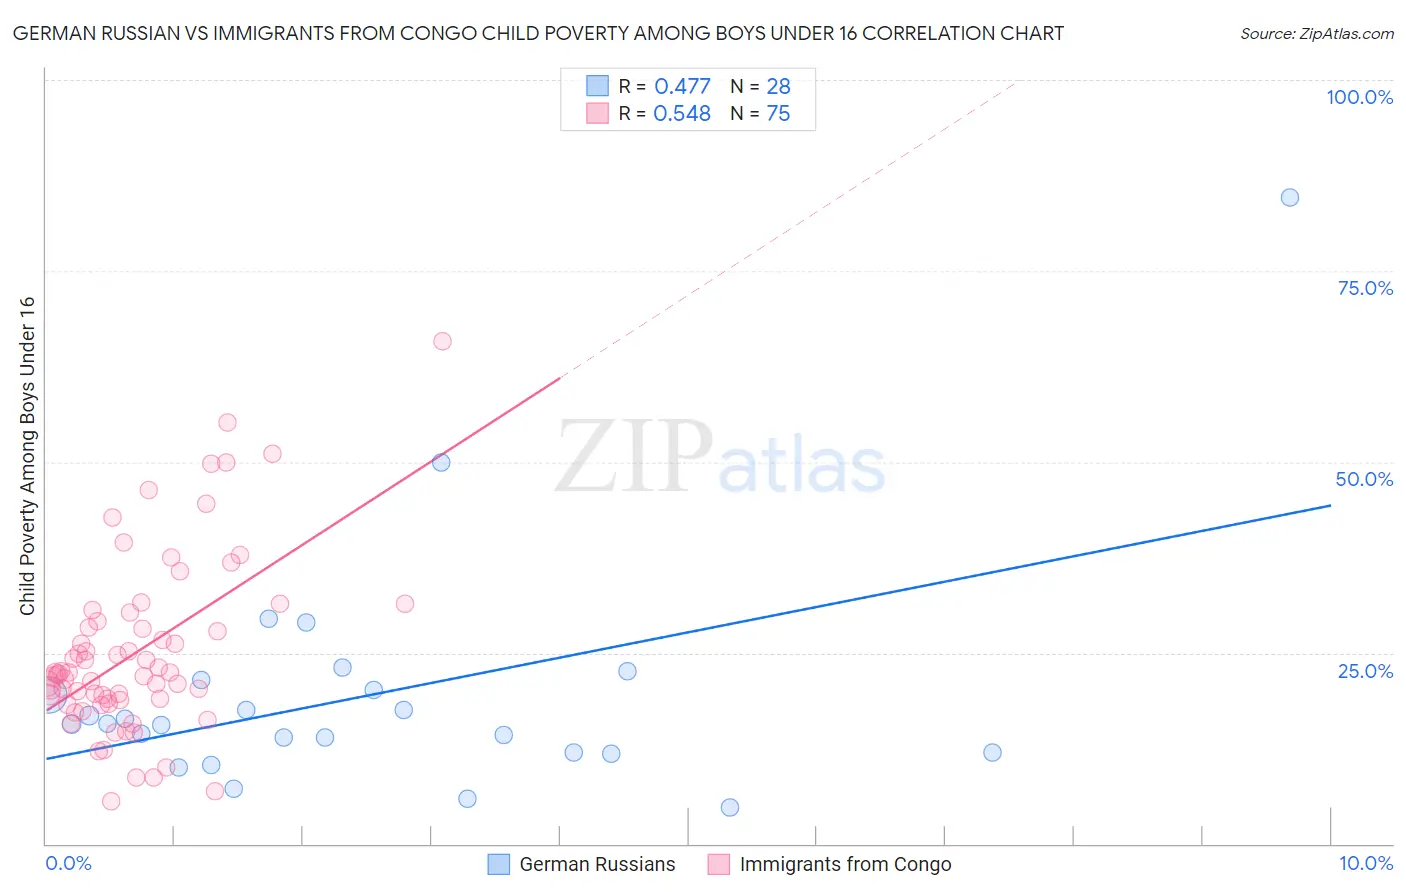 German Russian vs Immigrants from Congo Child Poverty Among Boys Under 16